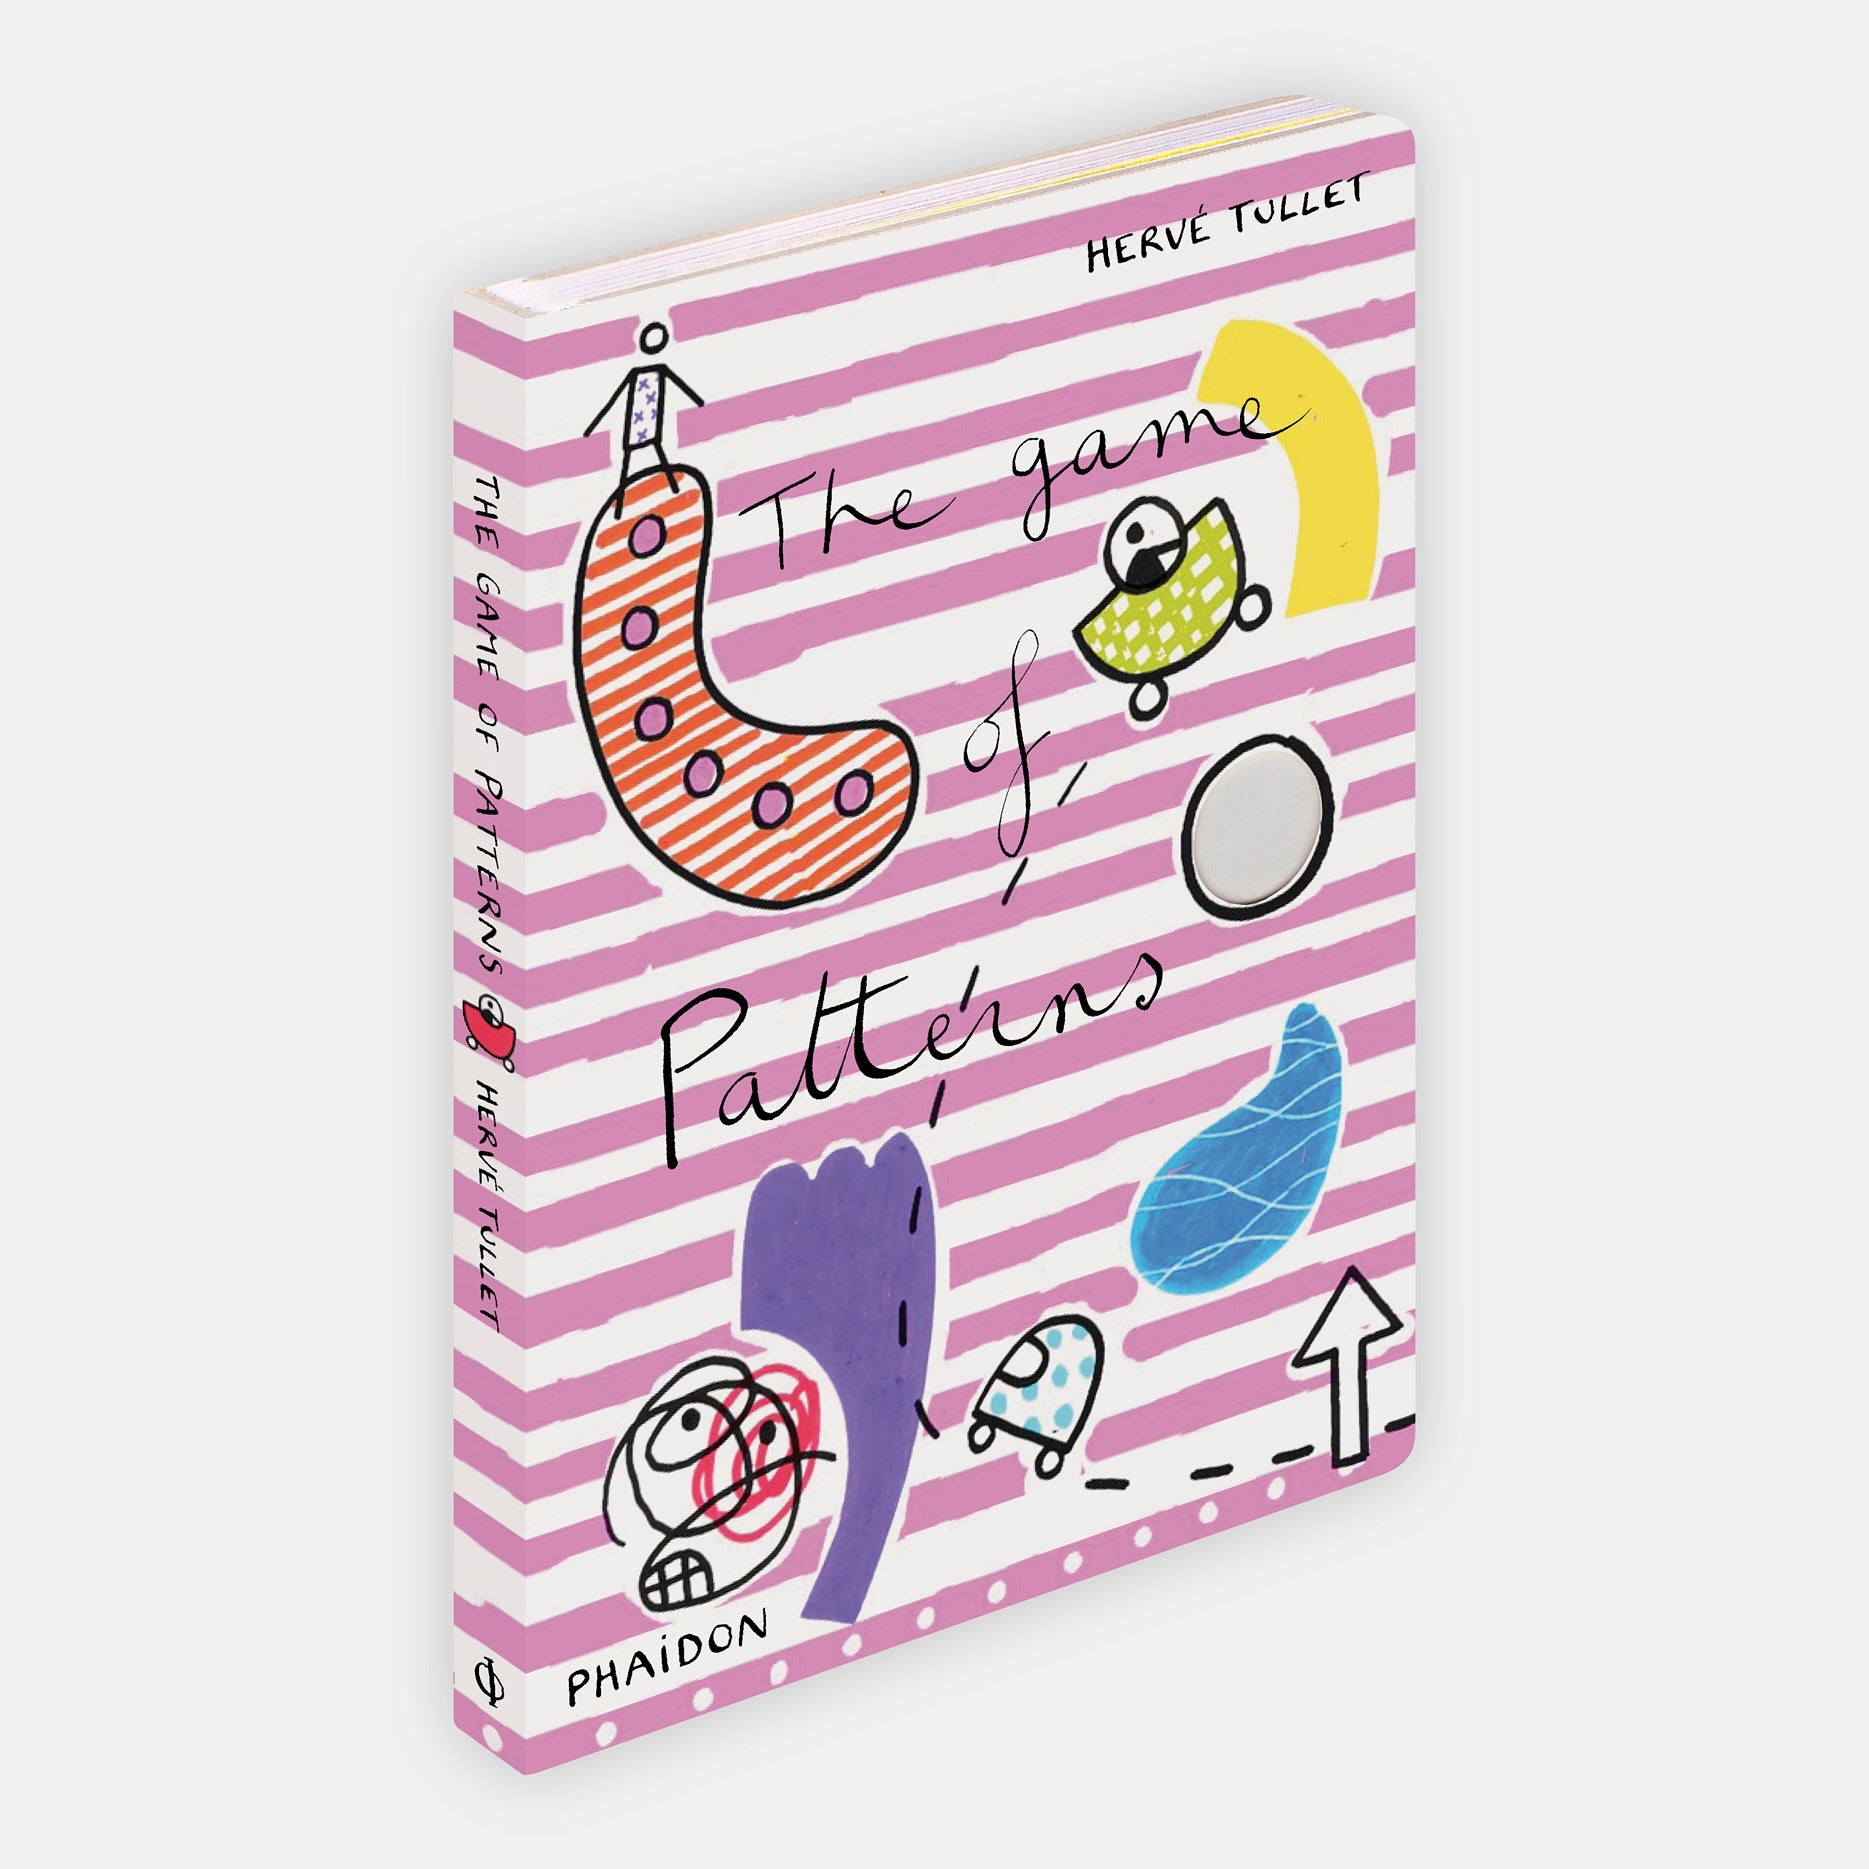 Cover of standing book with pink stripes and childlike illustrations Phaidon kids The Game of Patterns by Herve Tullet